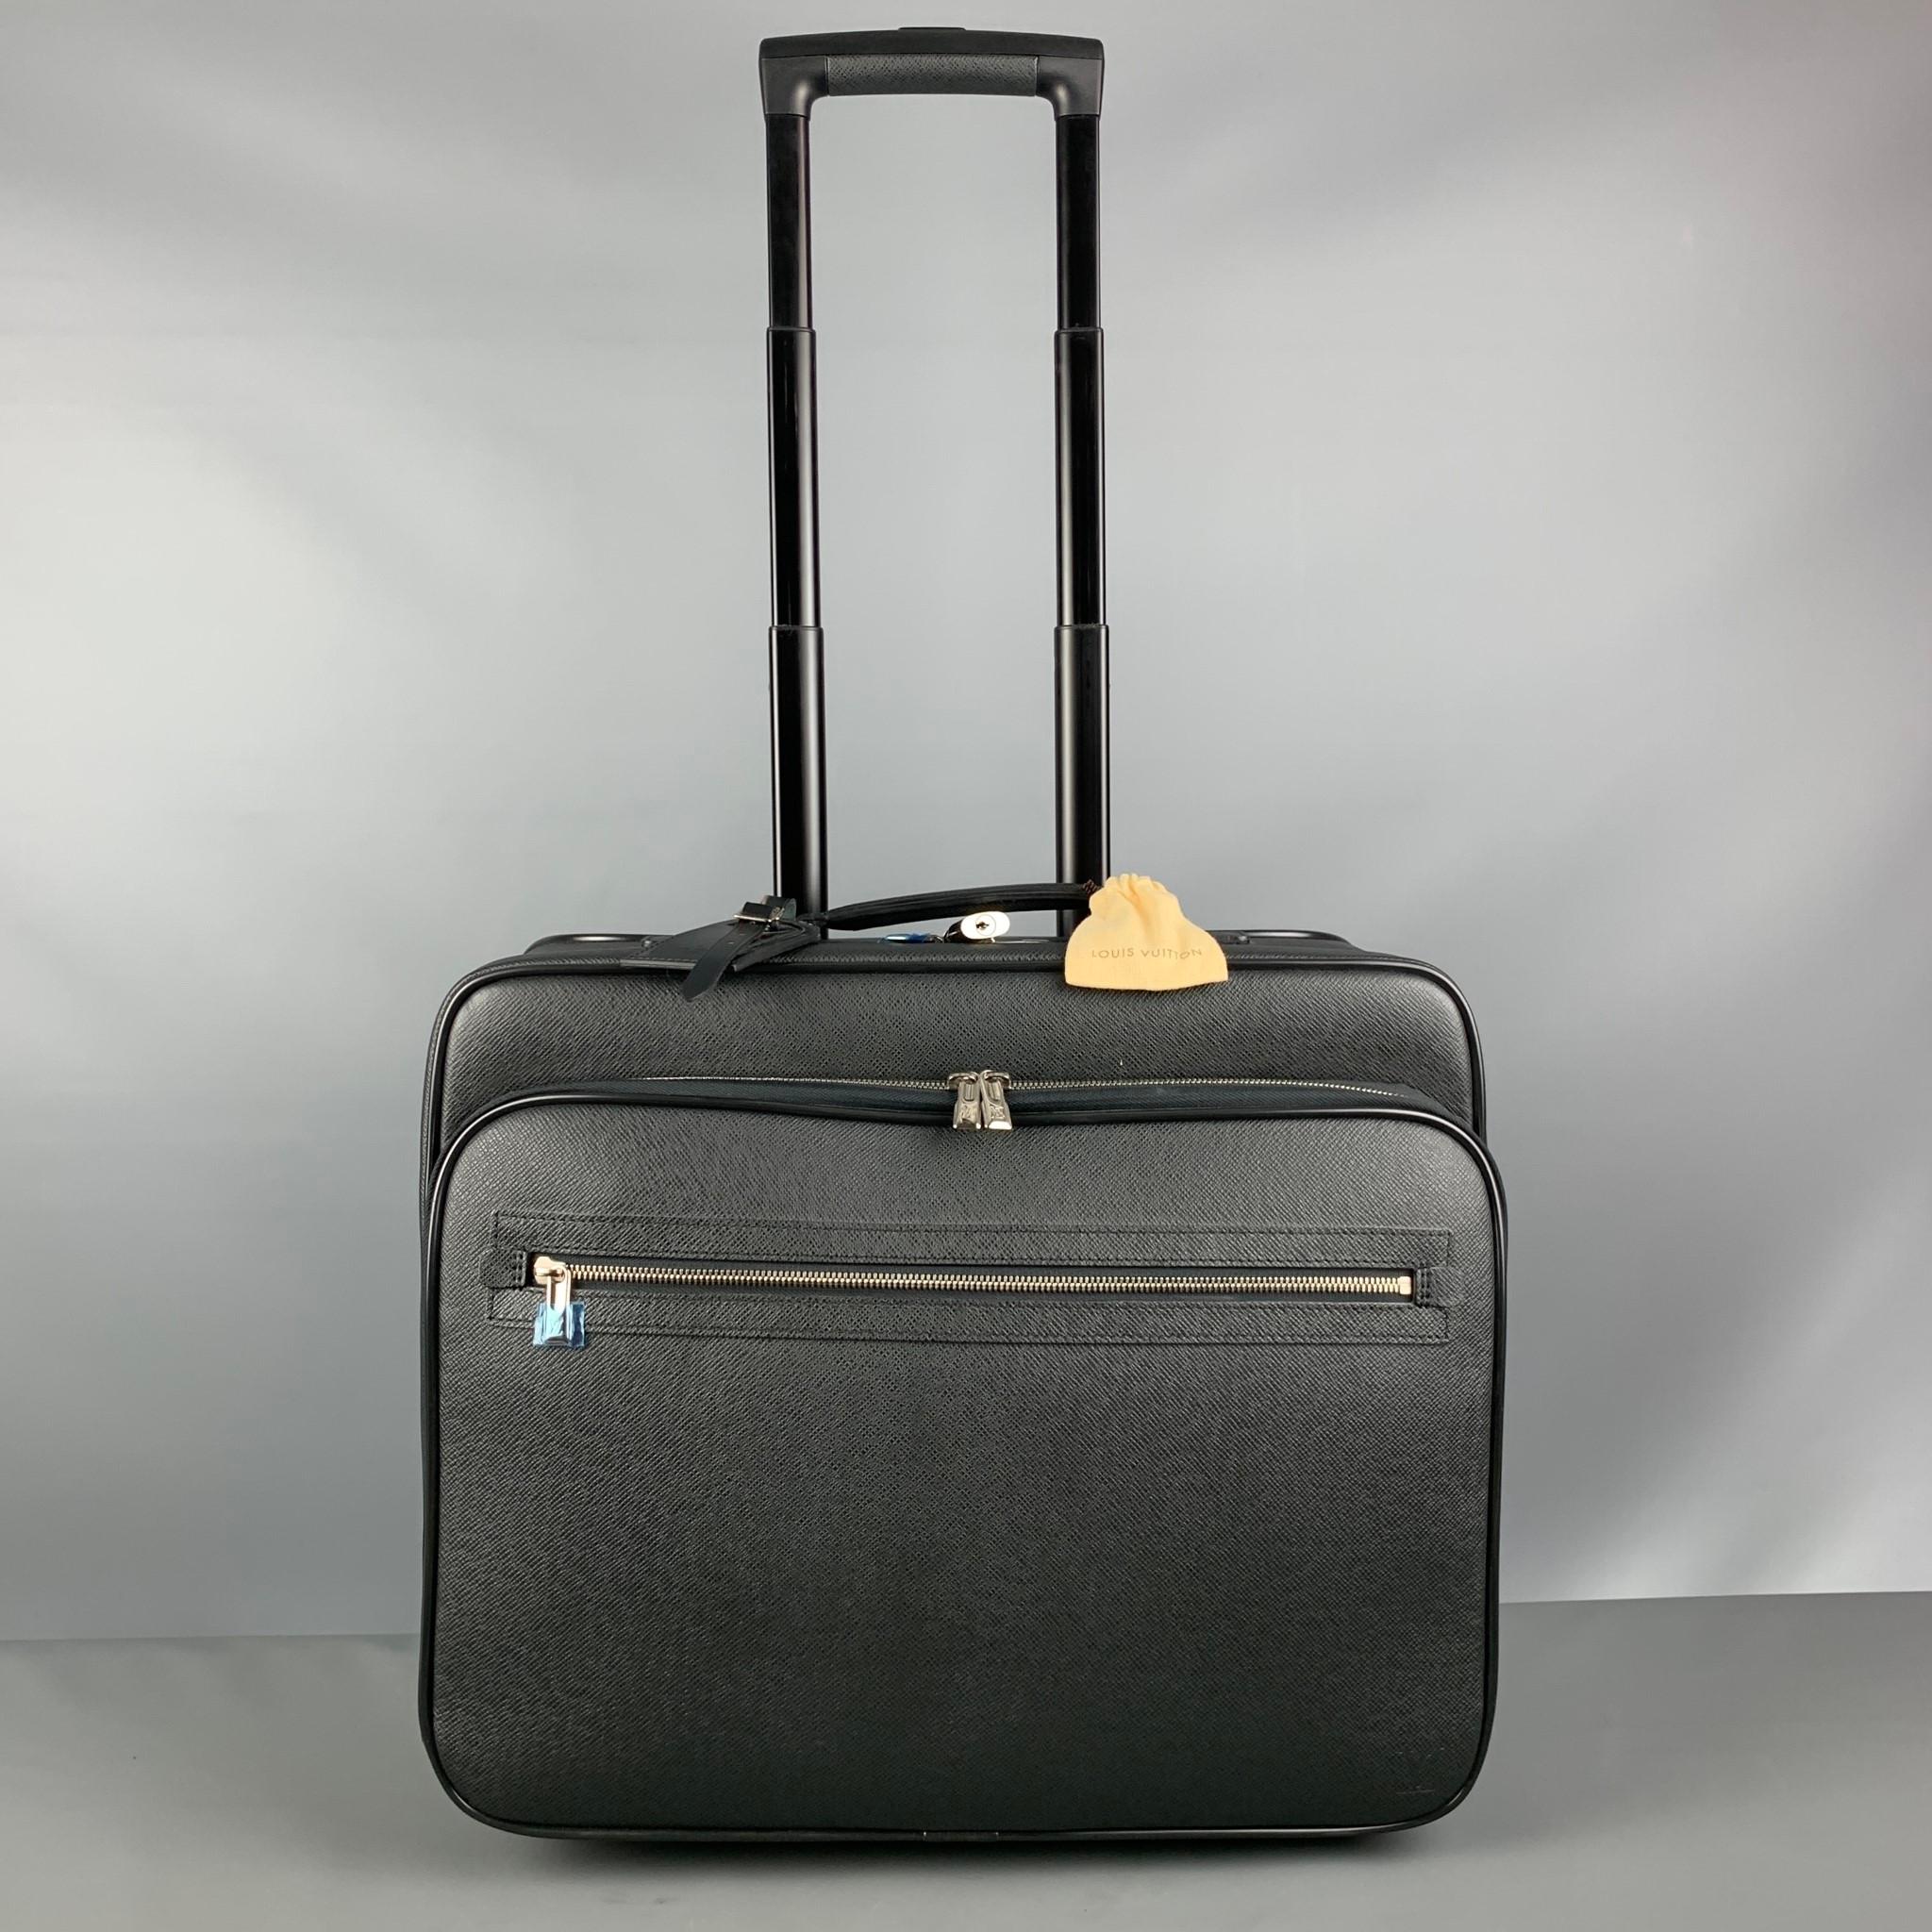 Men's LOUIS VUITTON All Pilot Case Black Textured Leather Carry-On Roller Luggage Bag